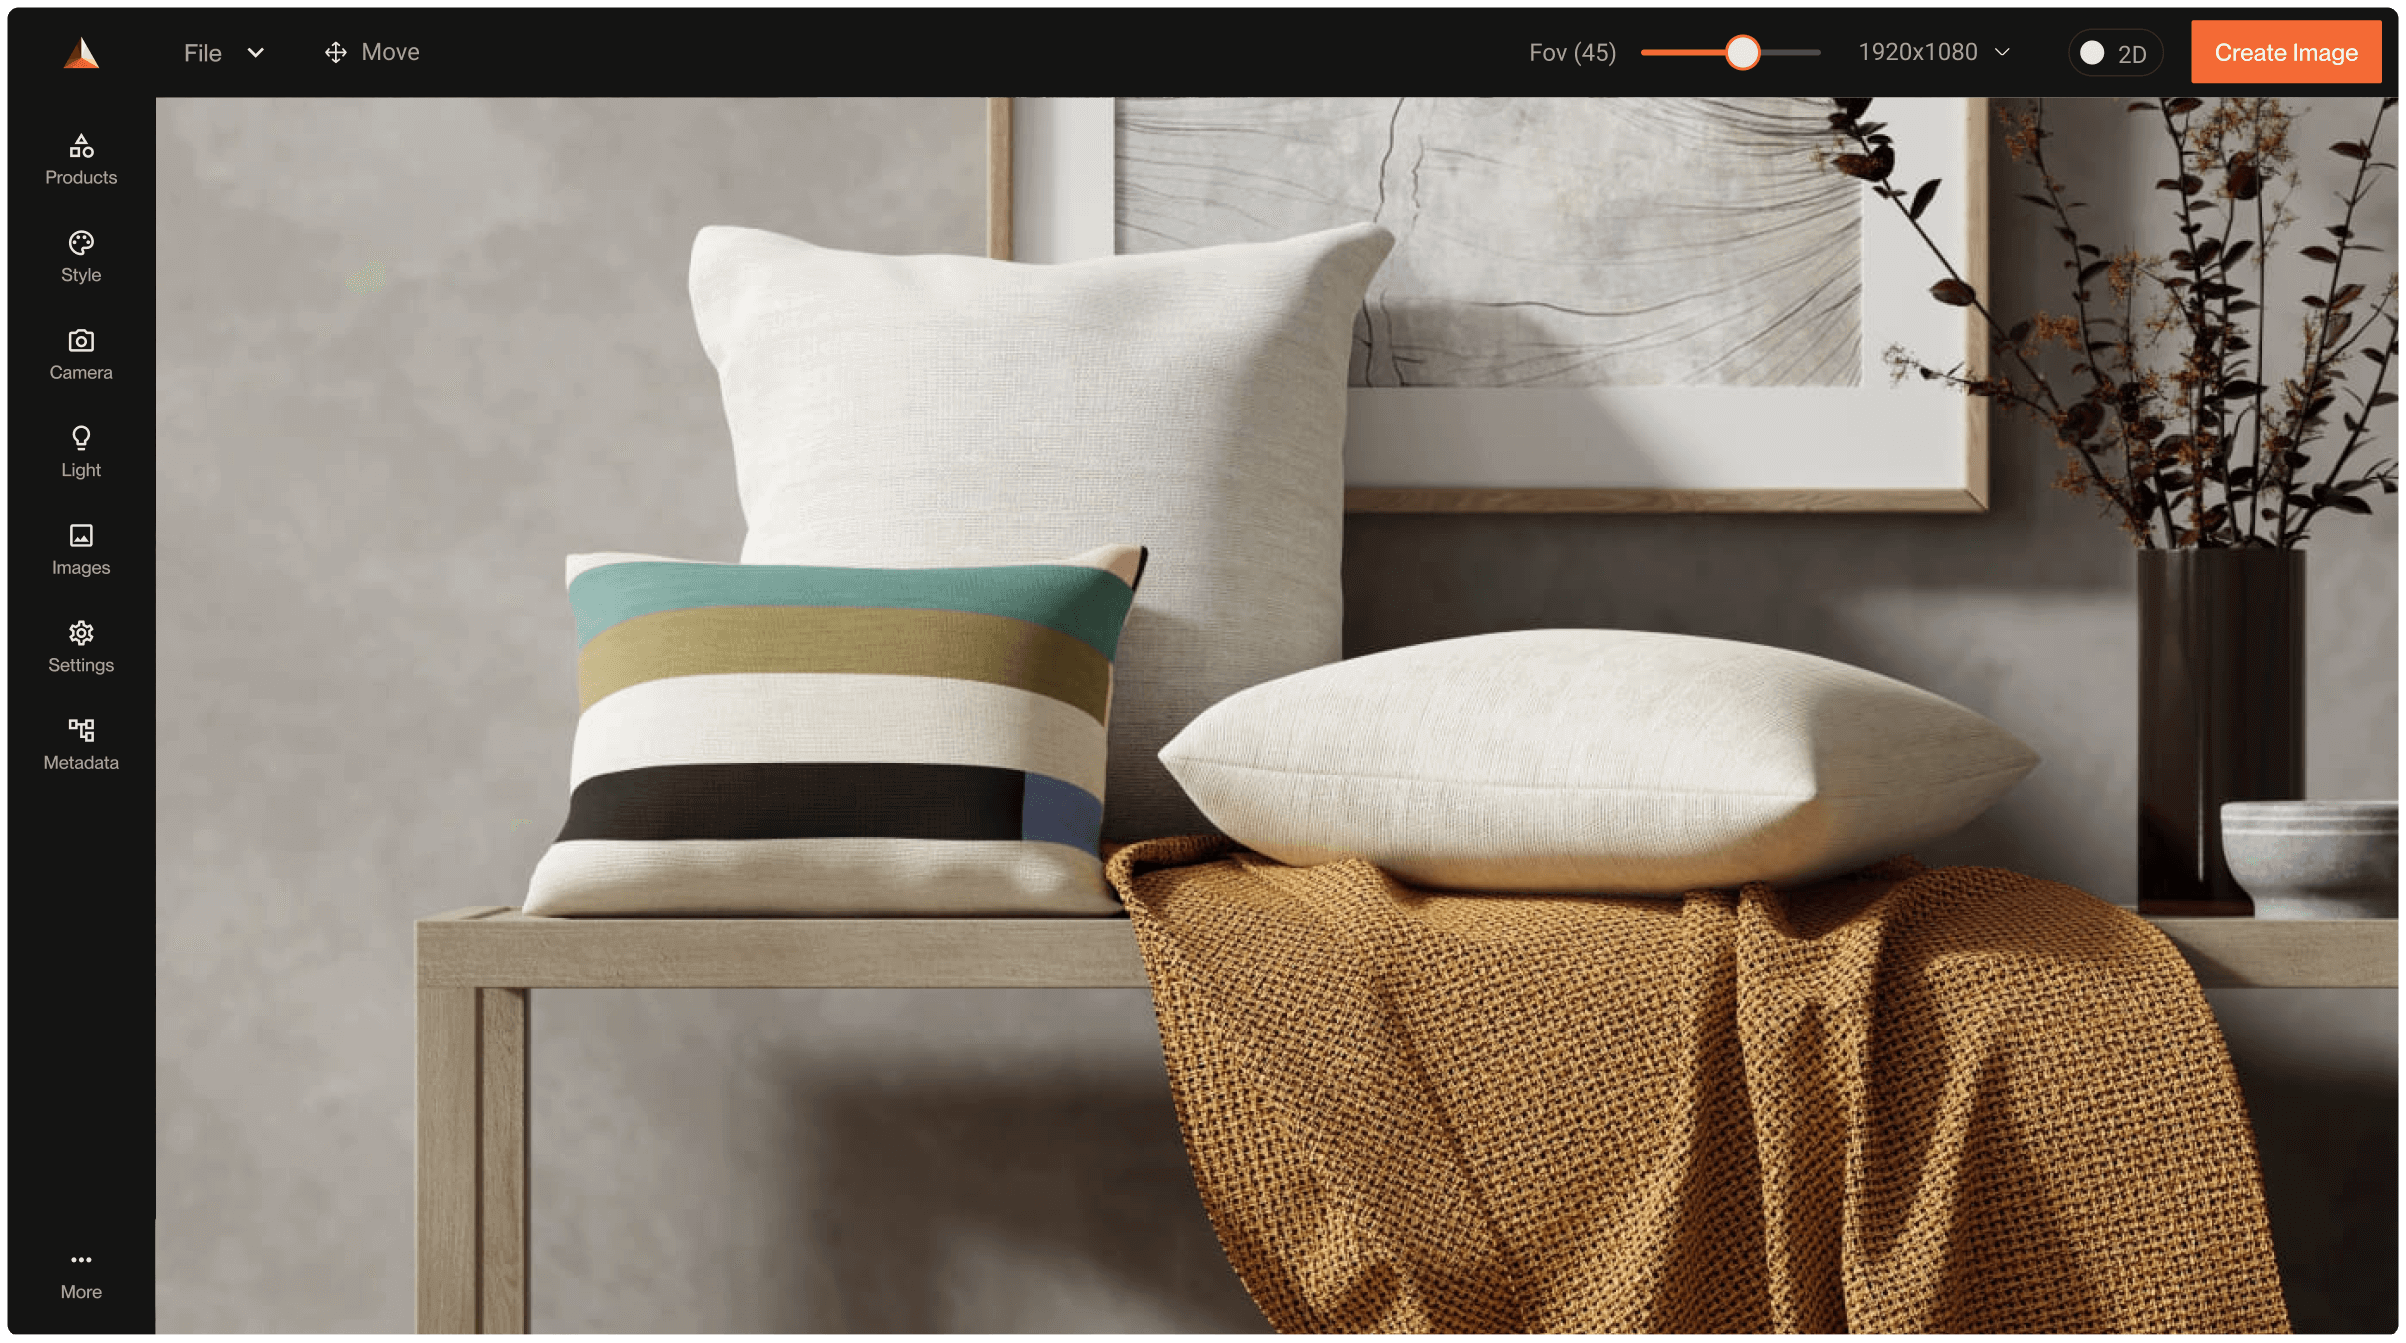 Lifestyle imagery of pillows, textiles, accessories made with imagine.io template (1) (1)